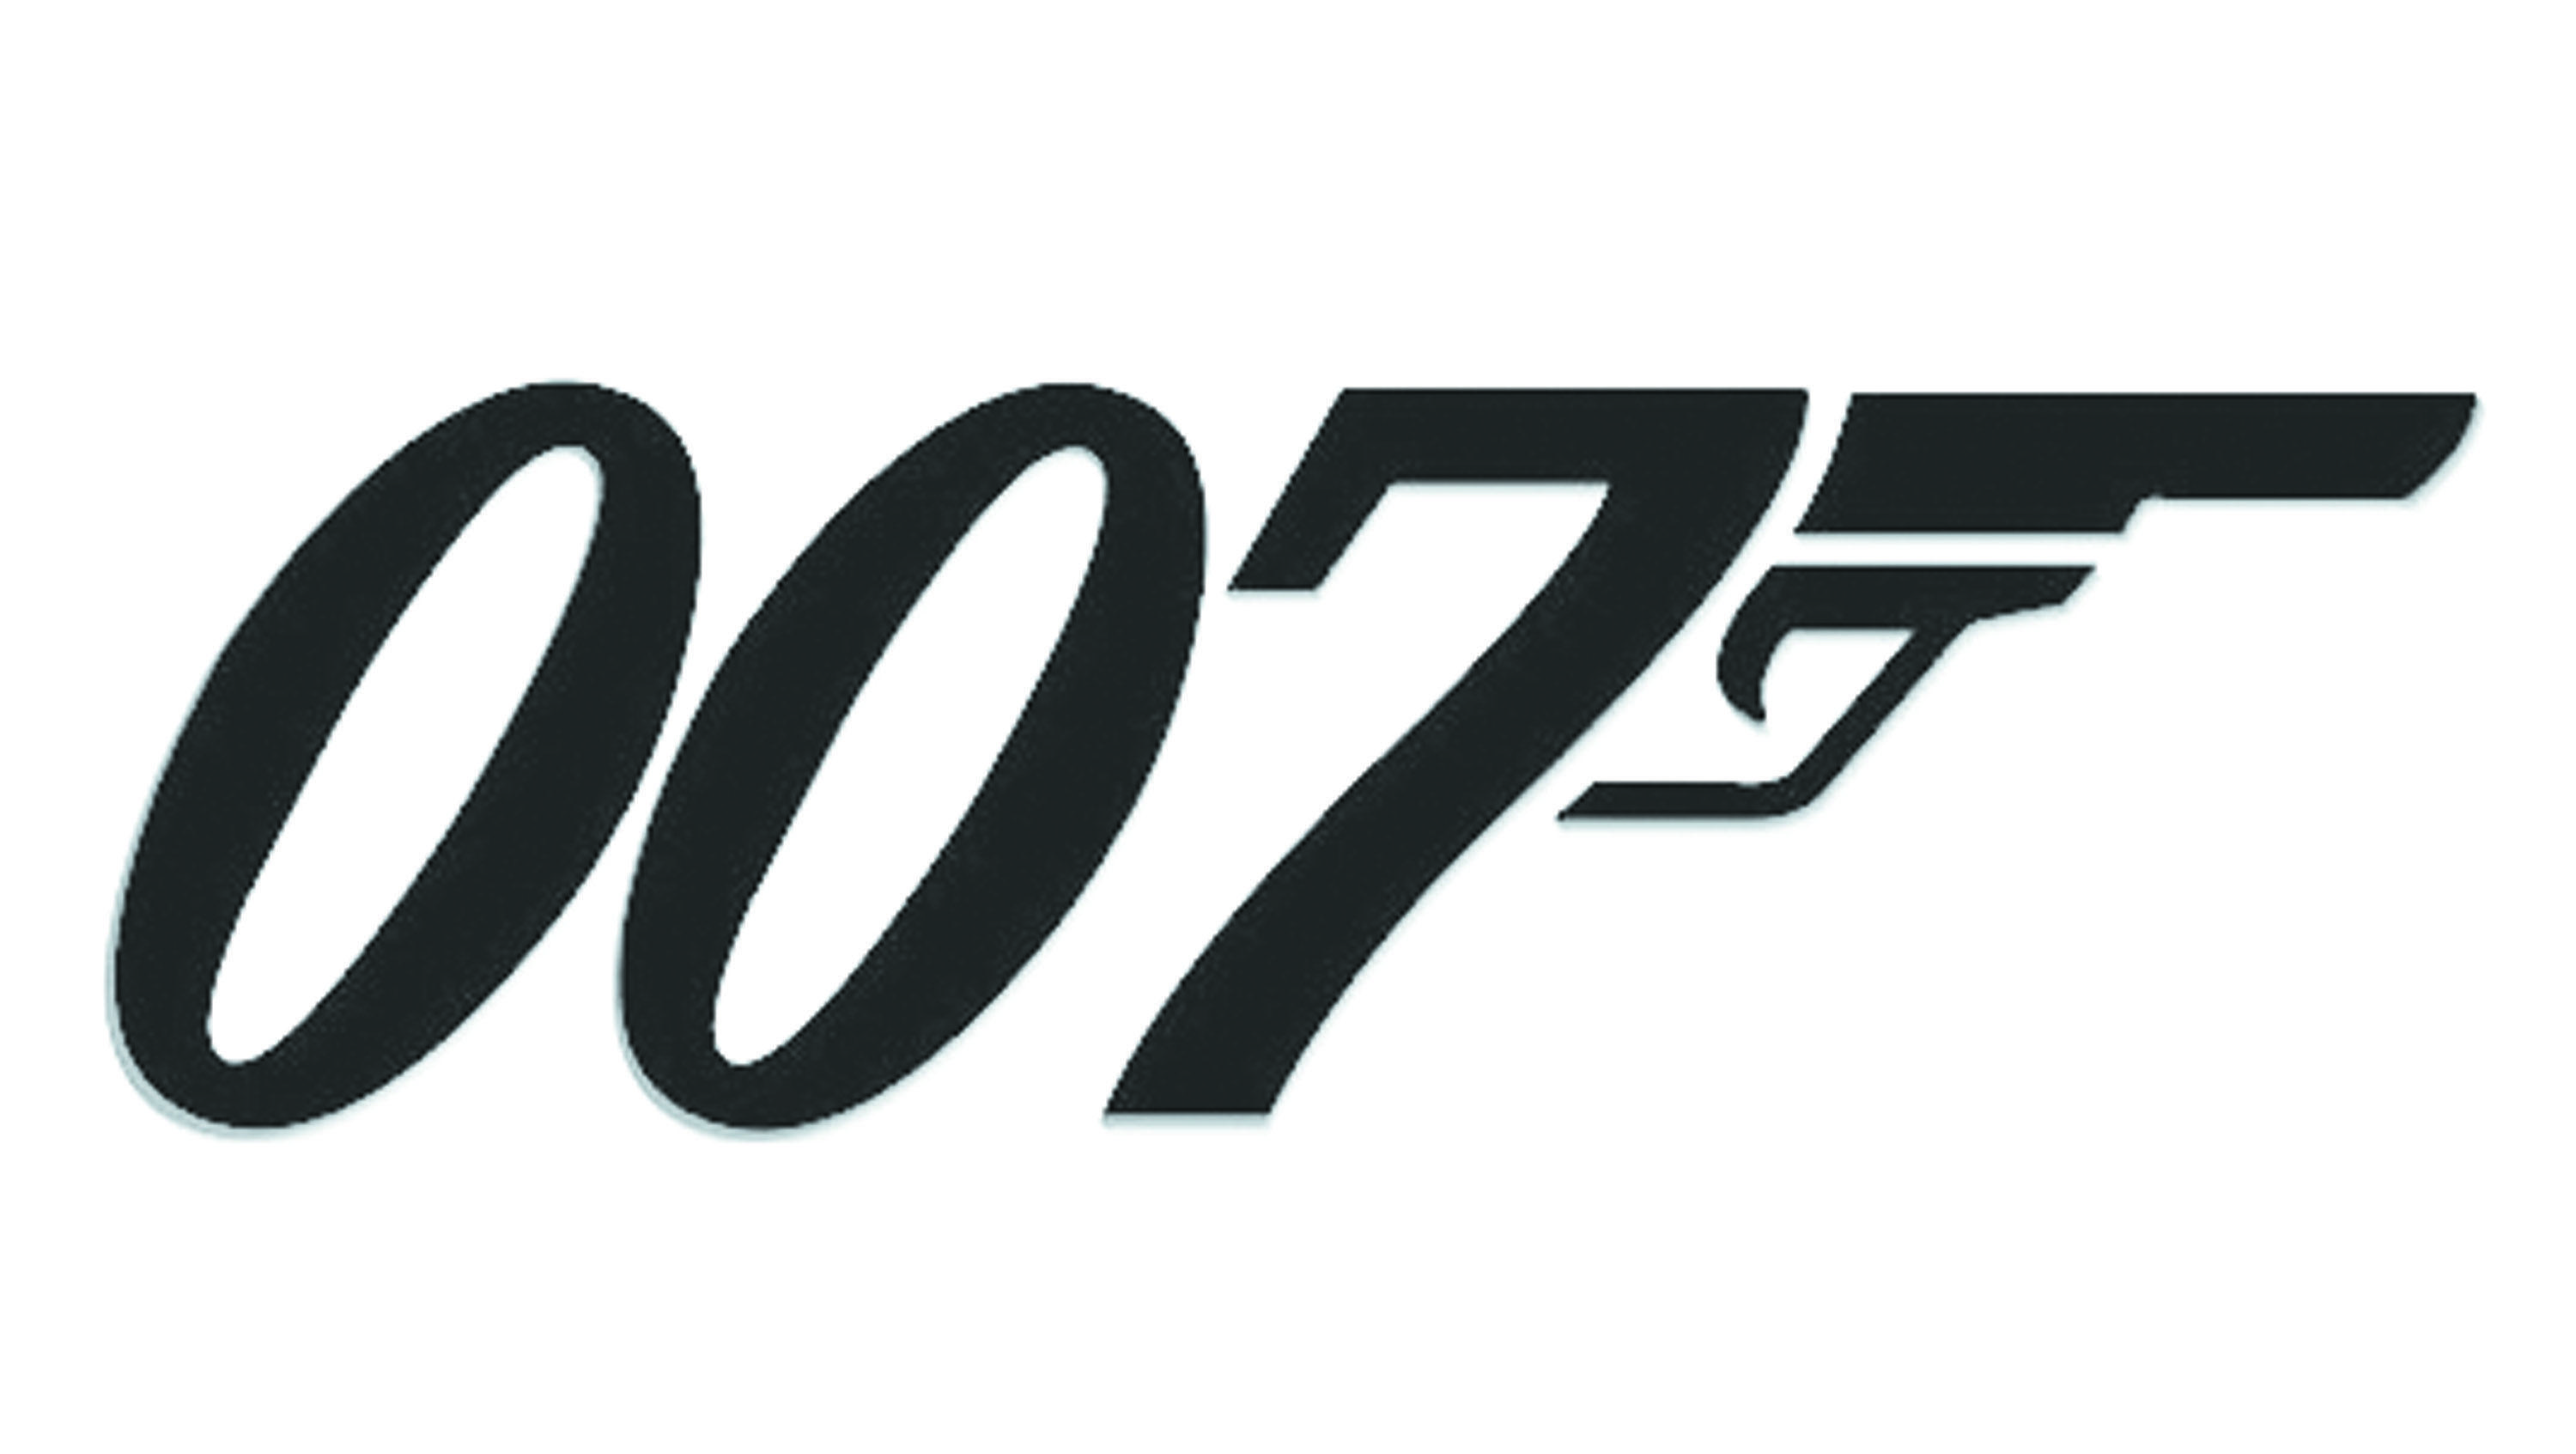 1995 Logo - The evolution of the 007 logo – The Spy Command Feature Story Index